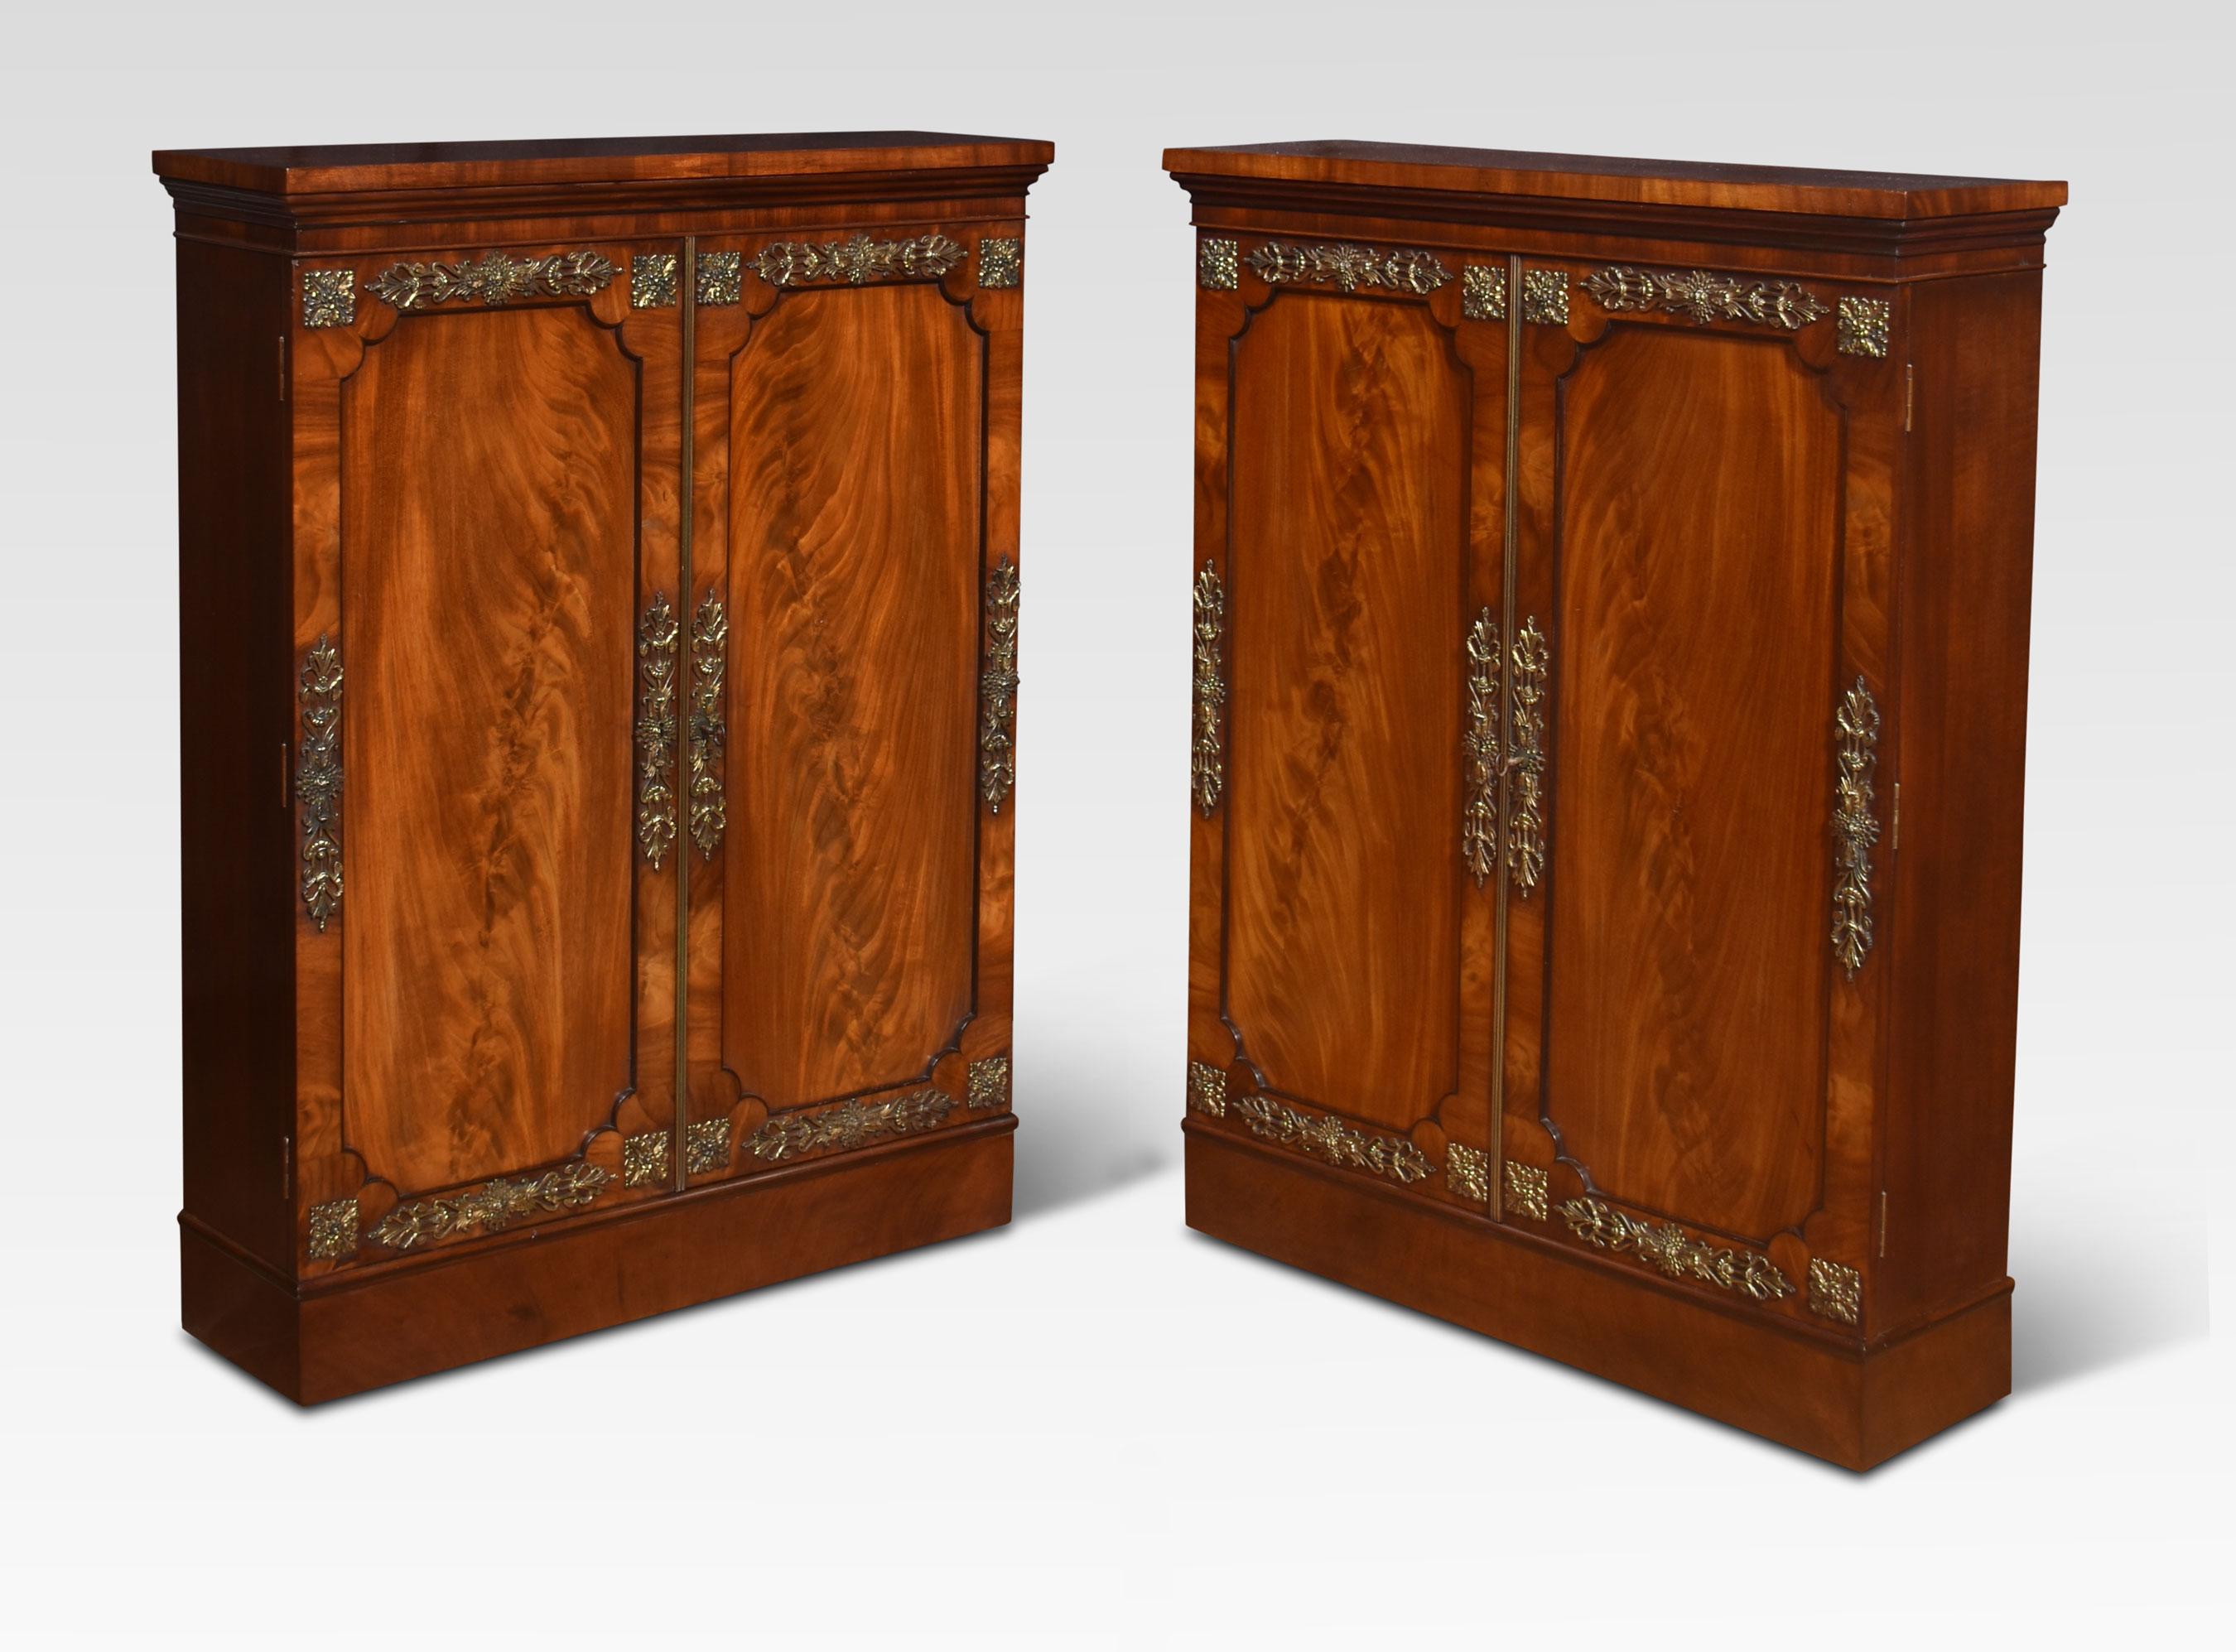 Pair of figured mahogany cabinets, the rectangular tops above a pair of well-figured mahogany doors opening to reveal an adjustable shelved interior. The cabinets are adorned with floral brass mounts and having Brahma locks. All raised up on a